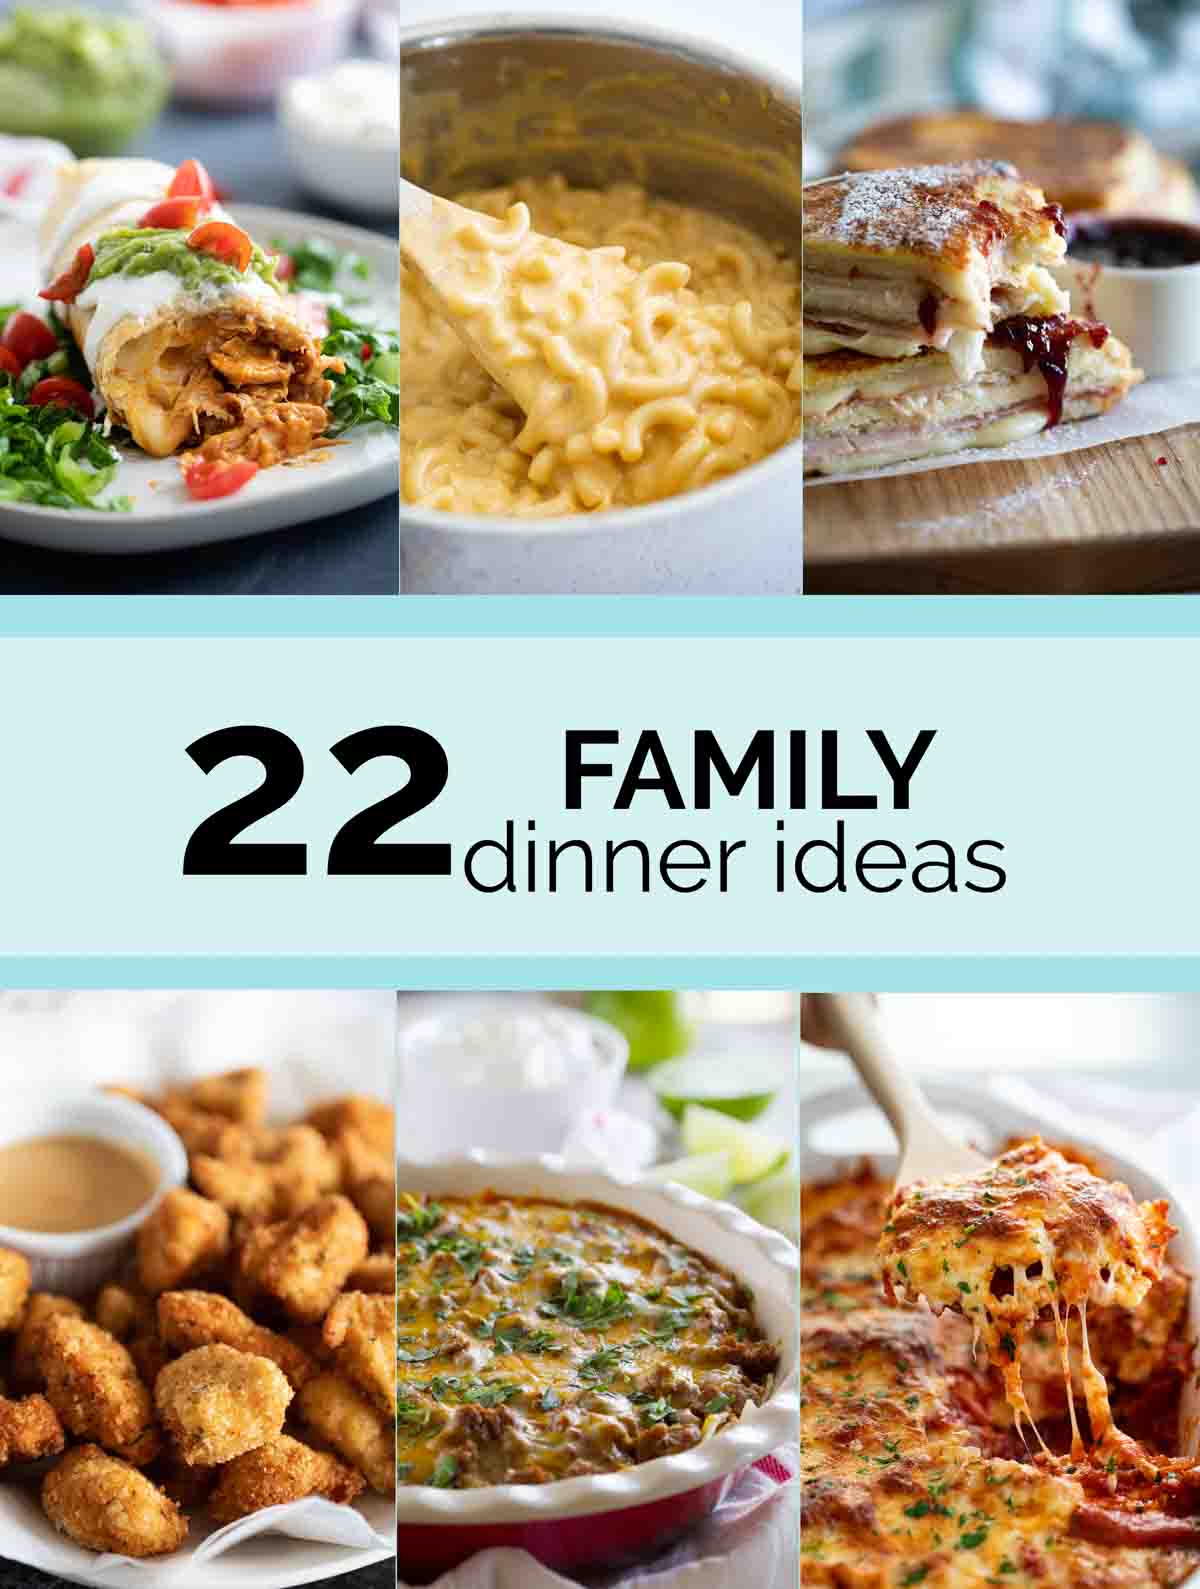 photo collage with 6 dinner recipes and text bar